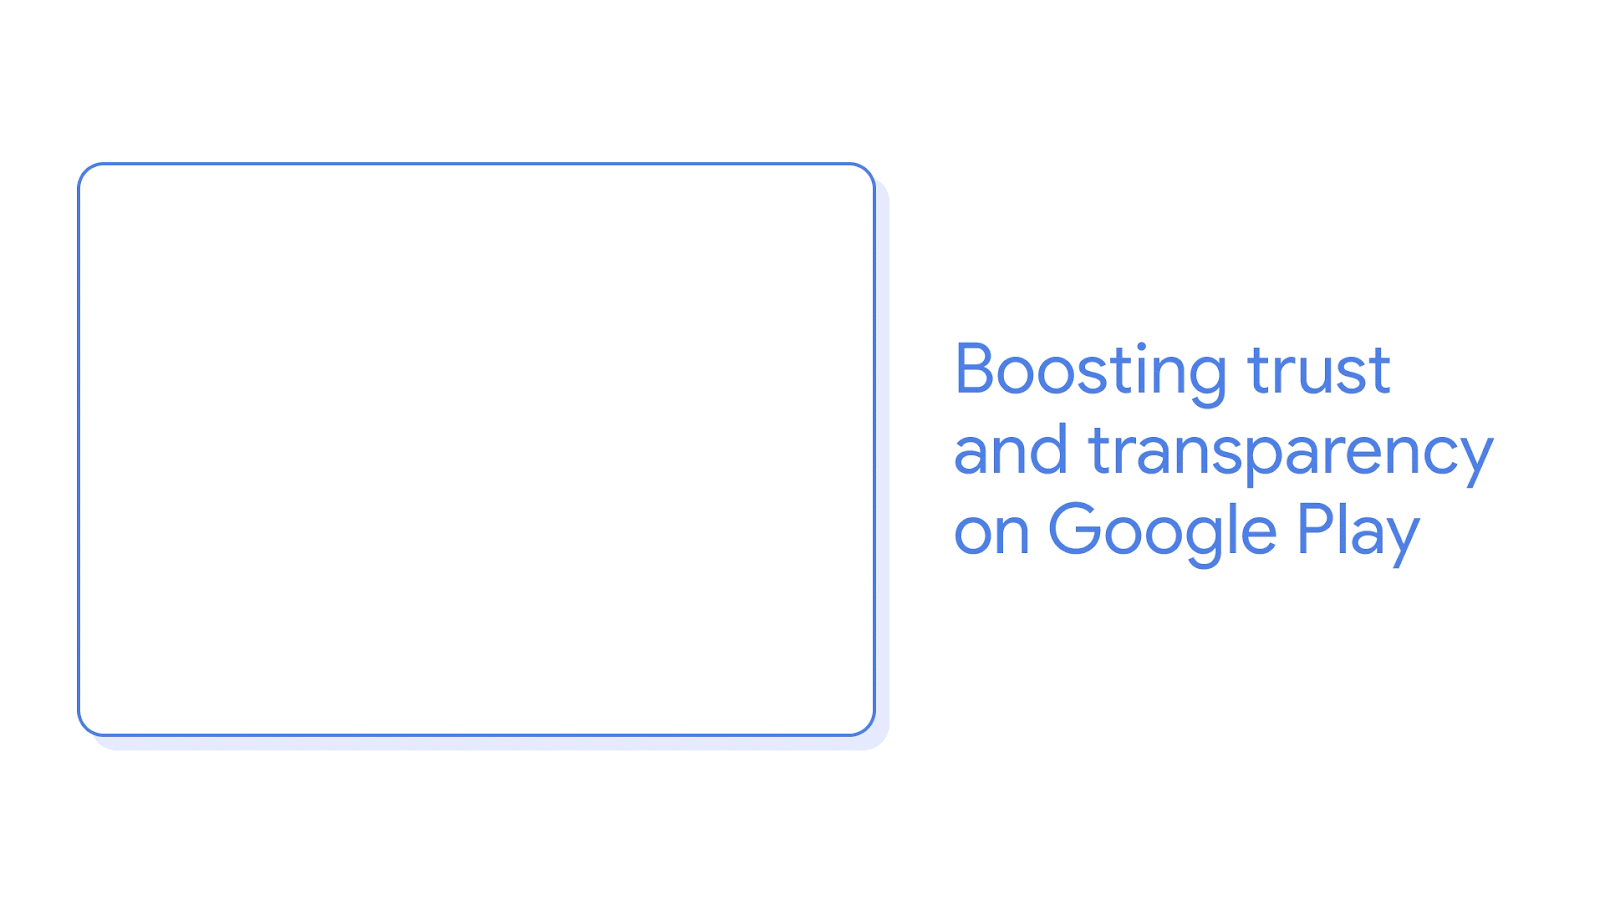 Moving image with trext reads Boosting trust and transparency in Google Play